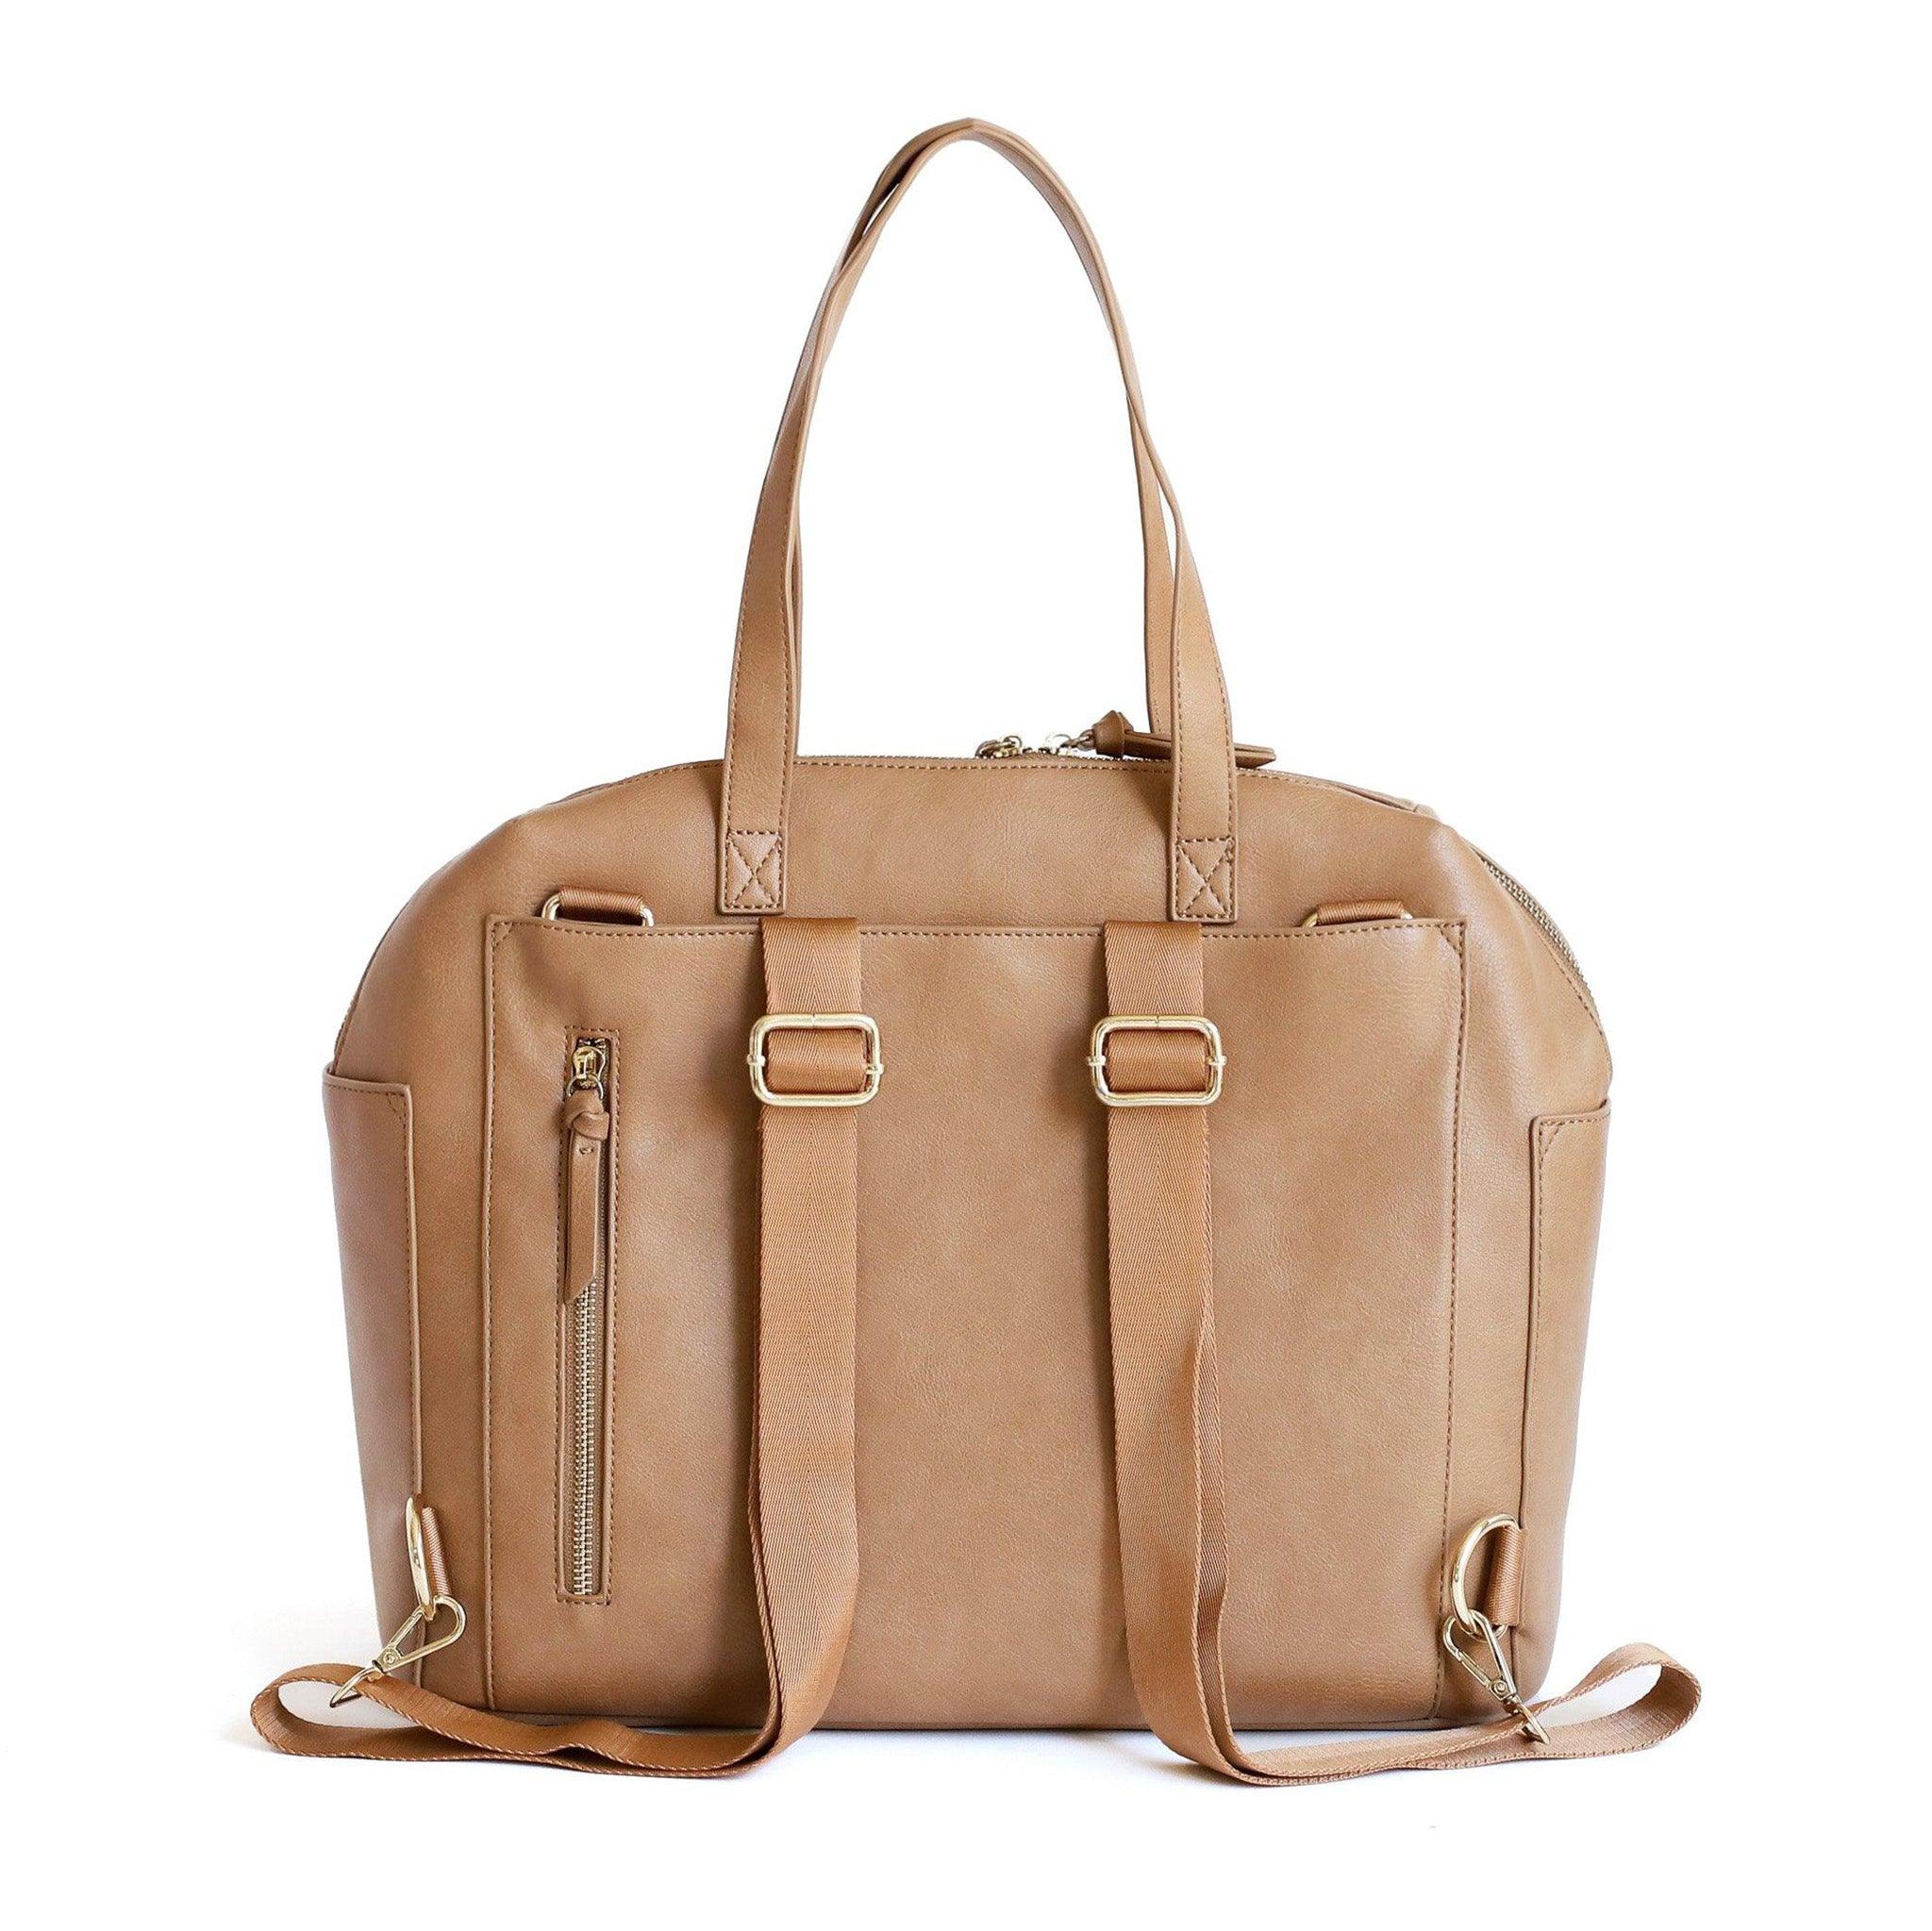 The Carryall Tote Bag Is Not Just For Moms | Bags, Leather business bag,  Casual bags